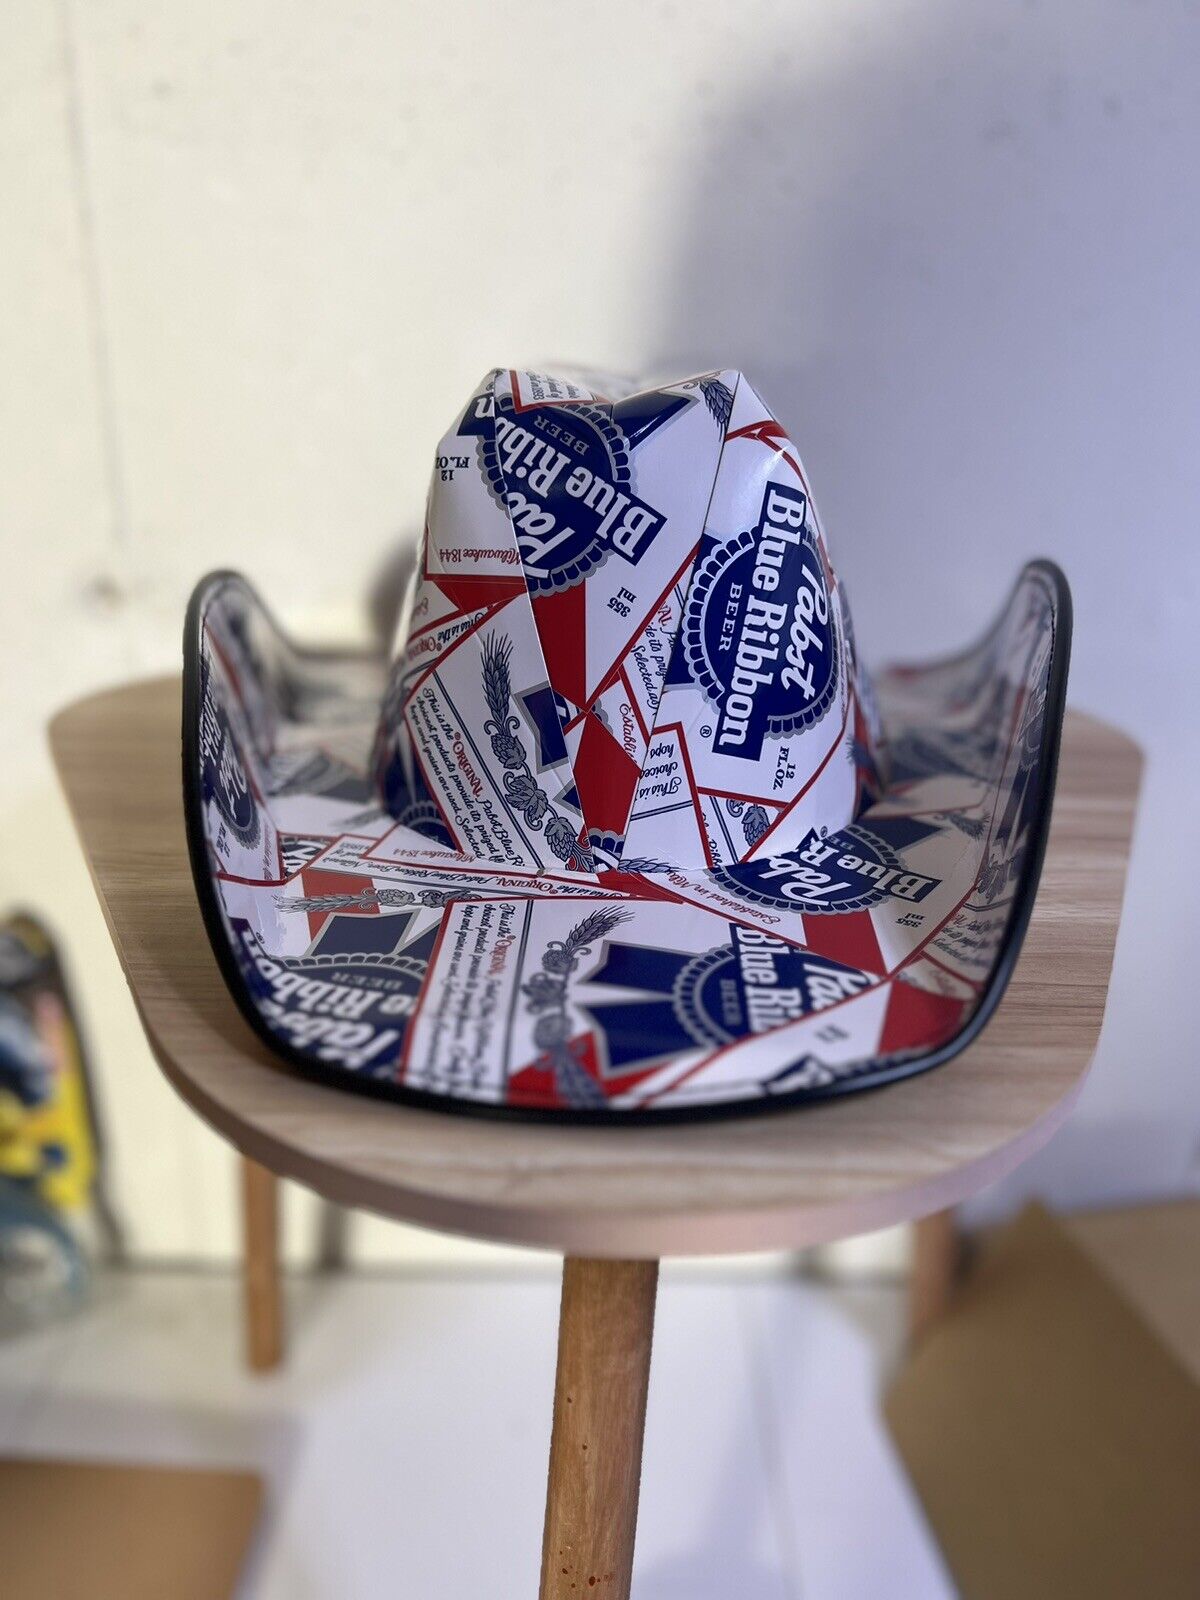 🔥PBR Pabst Blue Ribbon Beer Cowboy Hat In Hand  🔥 Country Thunder